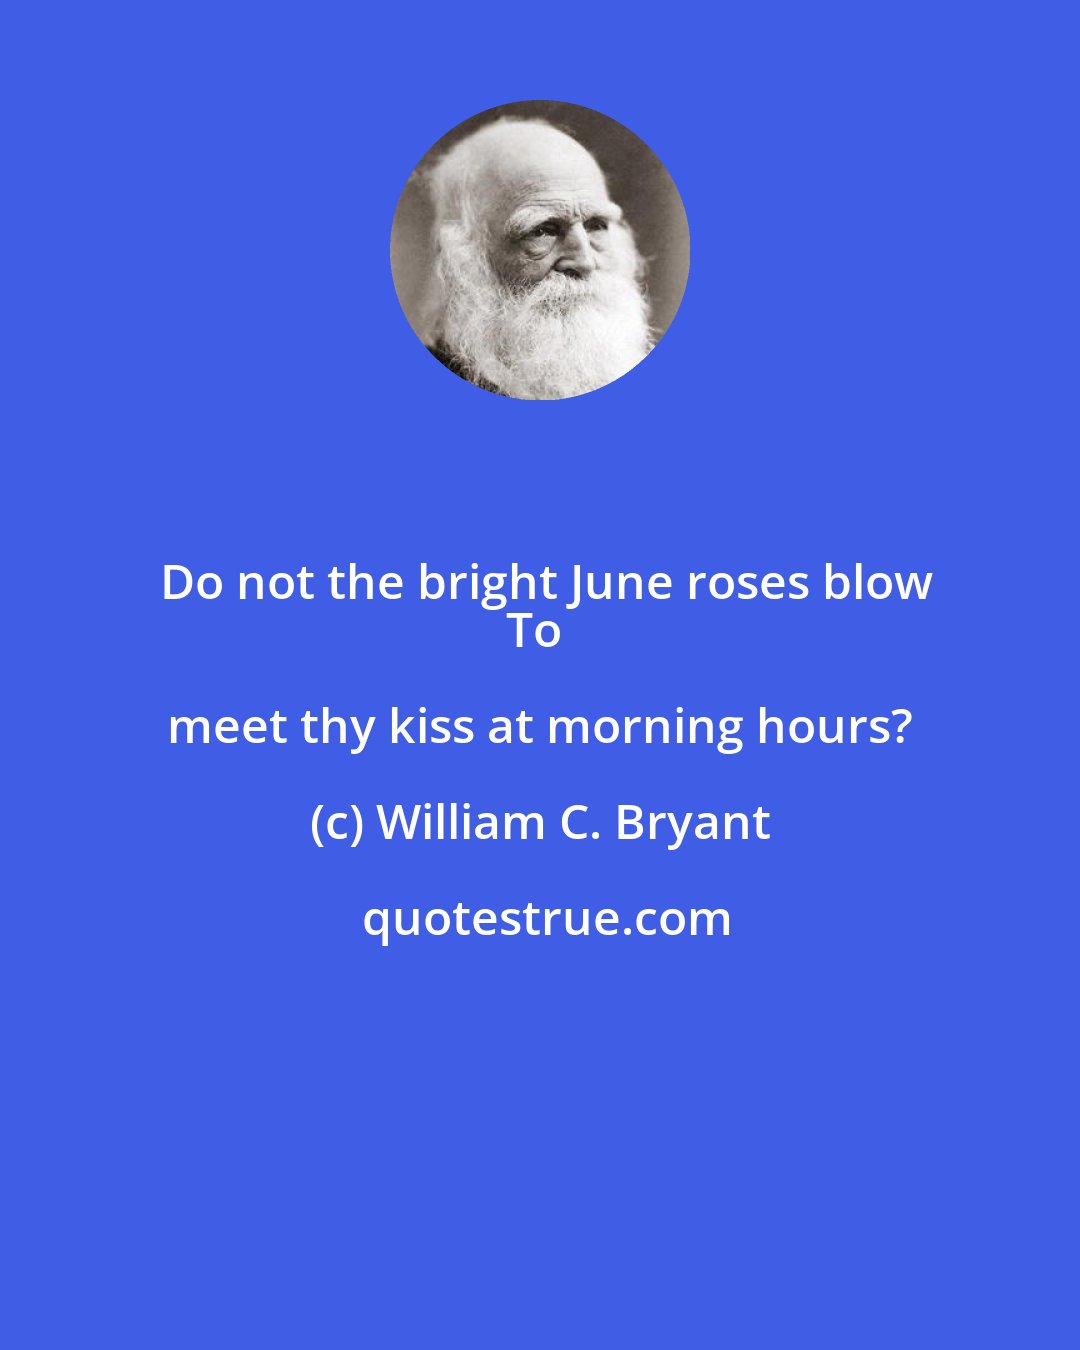 William C. Bryant: Do not the bright June roses blow
To meet thy kiss at morning hours?